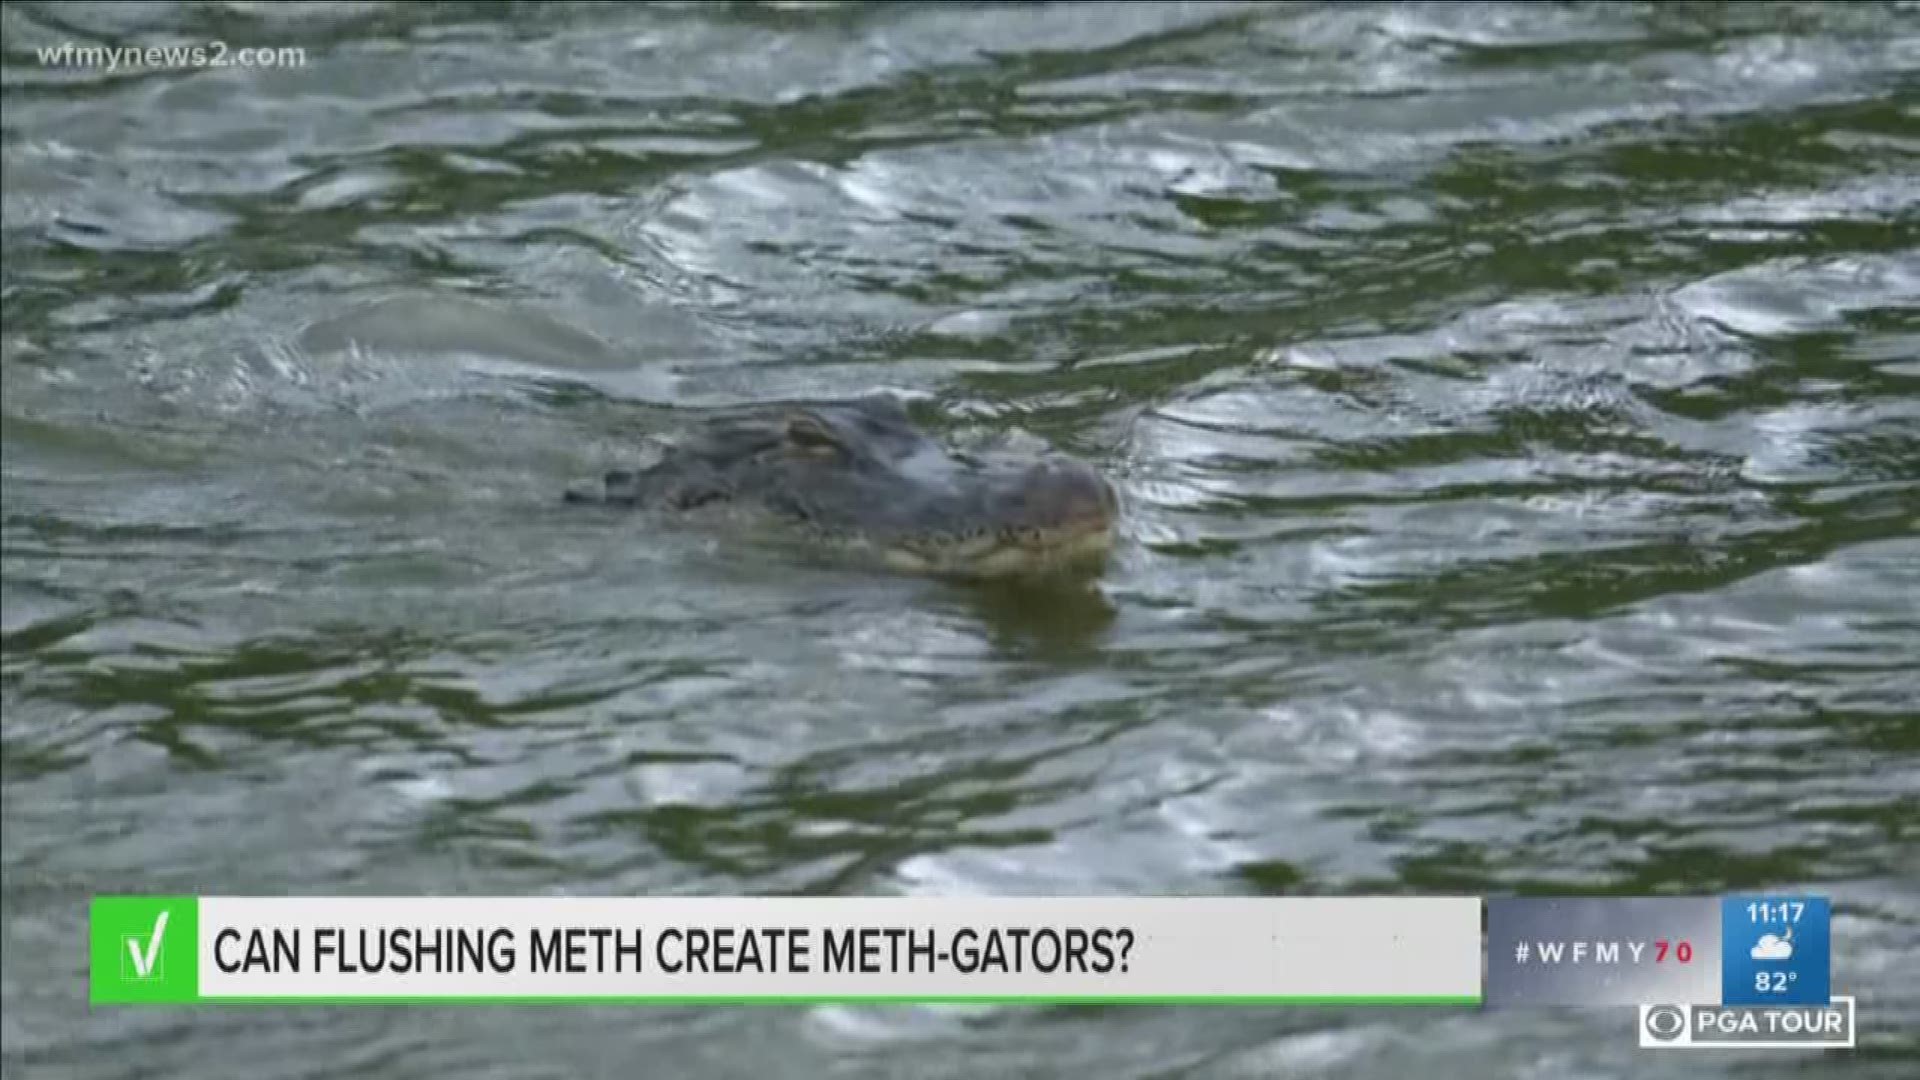 One police department is warning people that if they flush meth down the toilet, it could create meth gators.